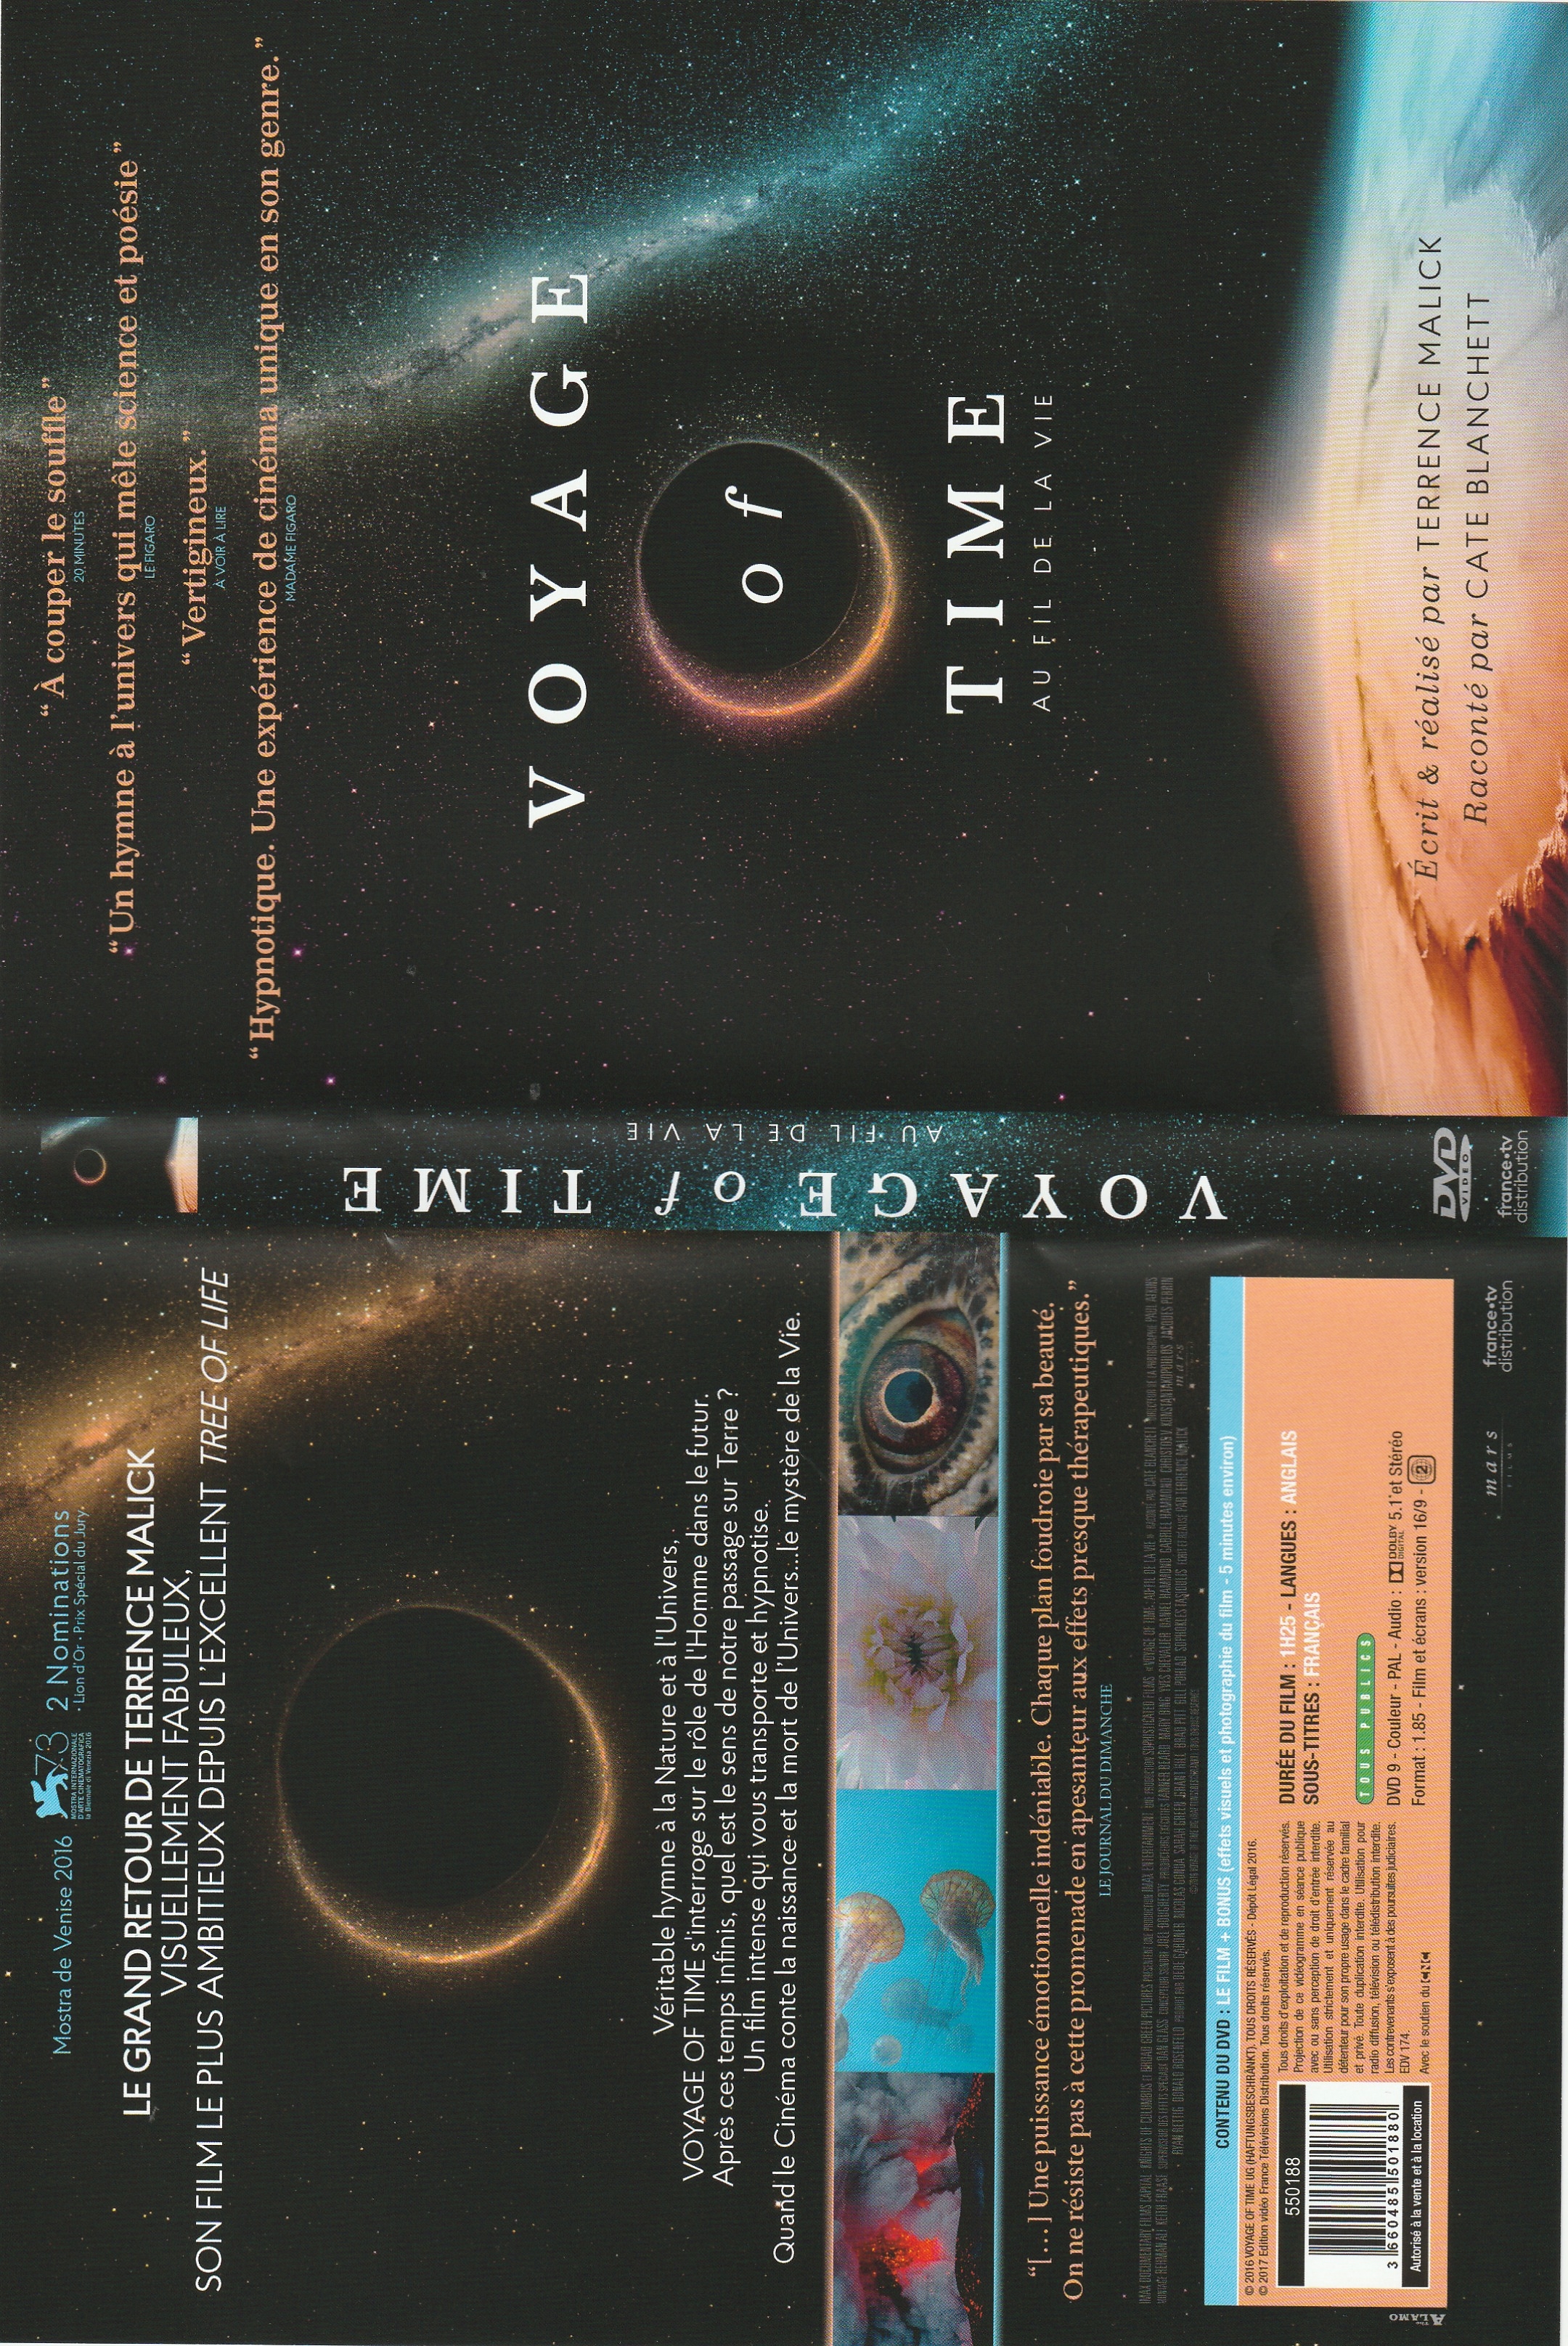 Jaquette DVD Voyage of time